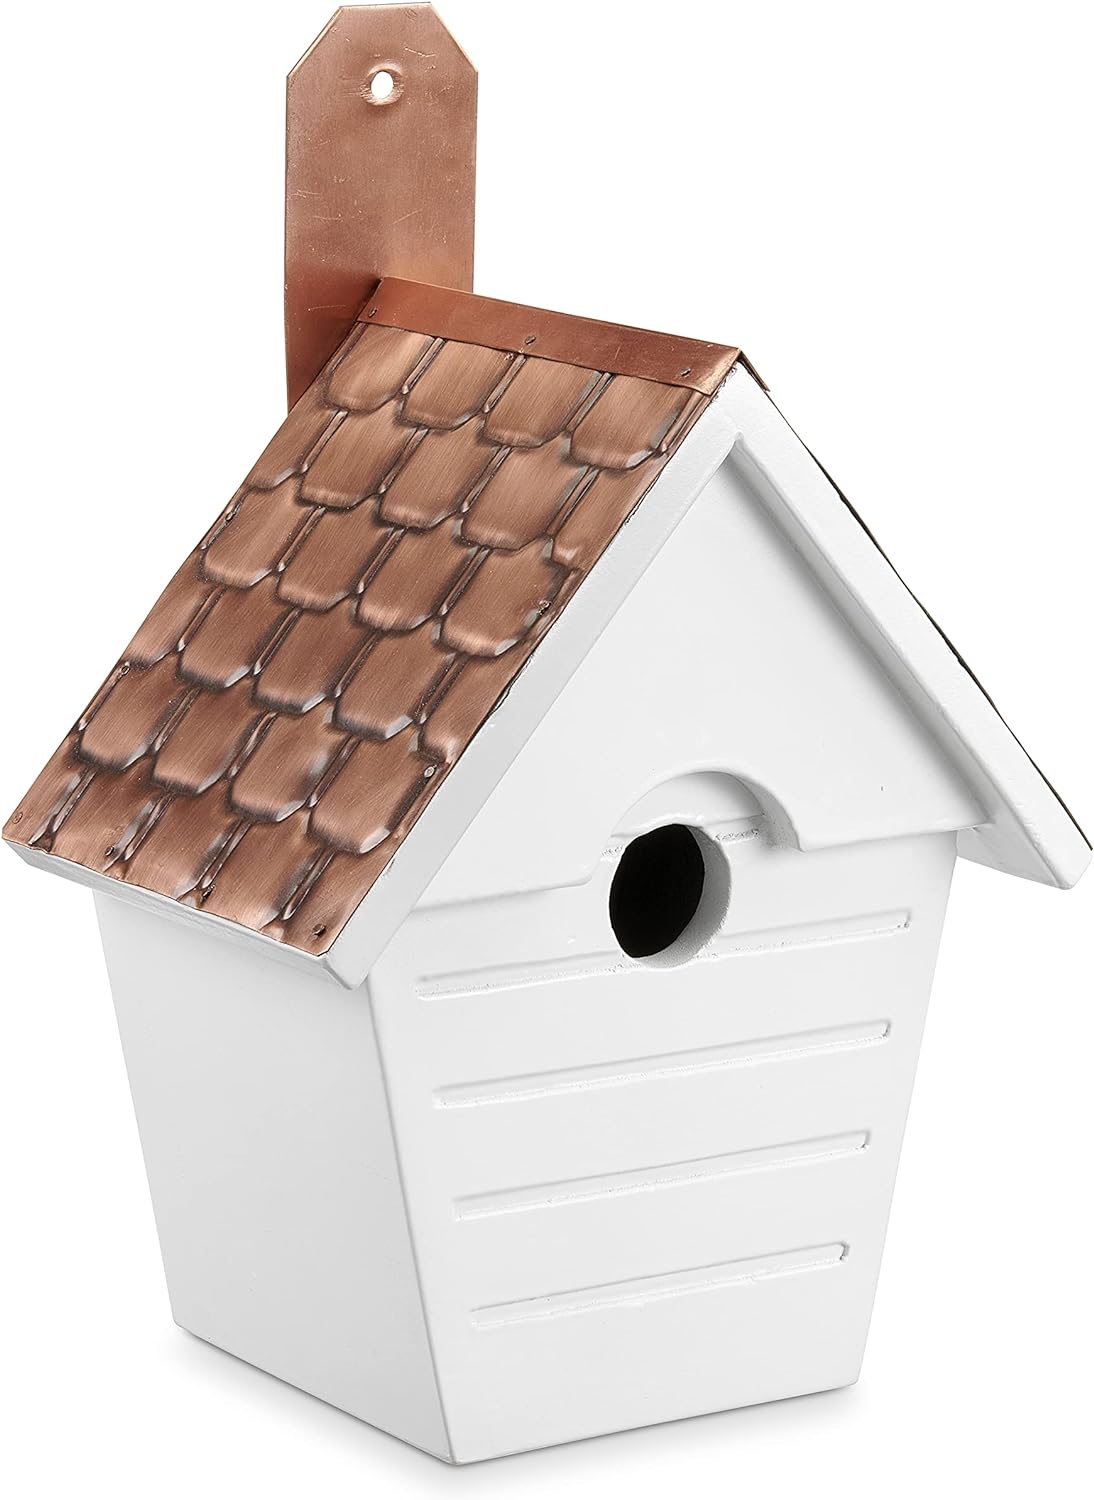 Classic Cottage Bird House – Pure Copper Roof by Good Directions